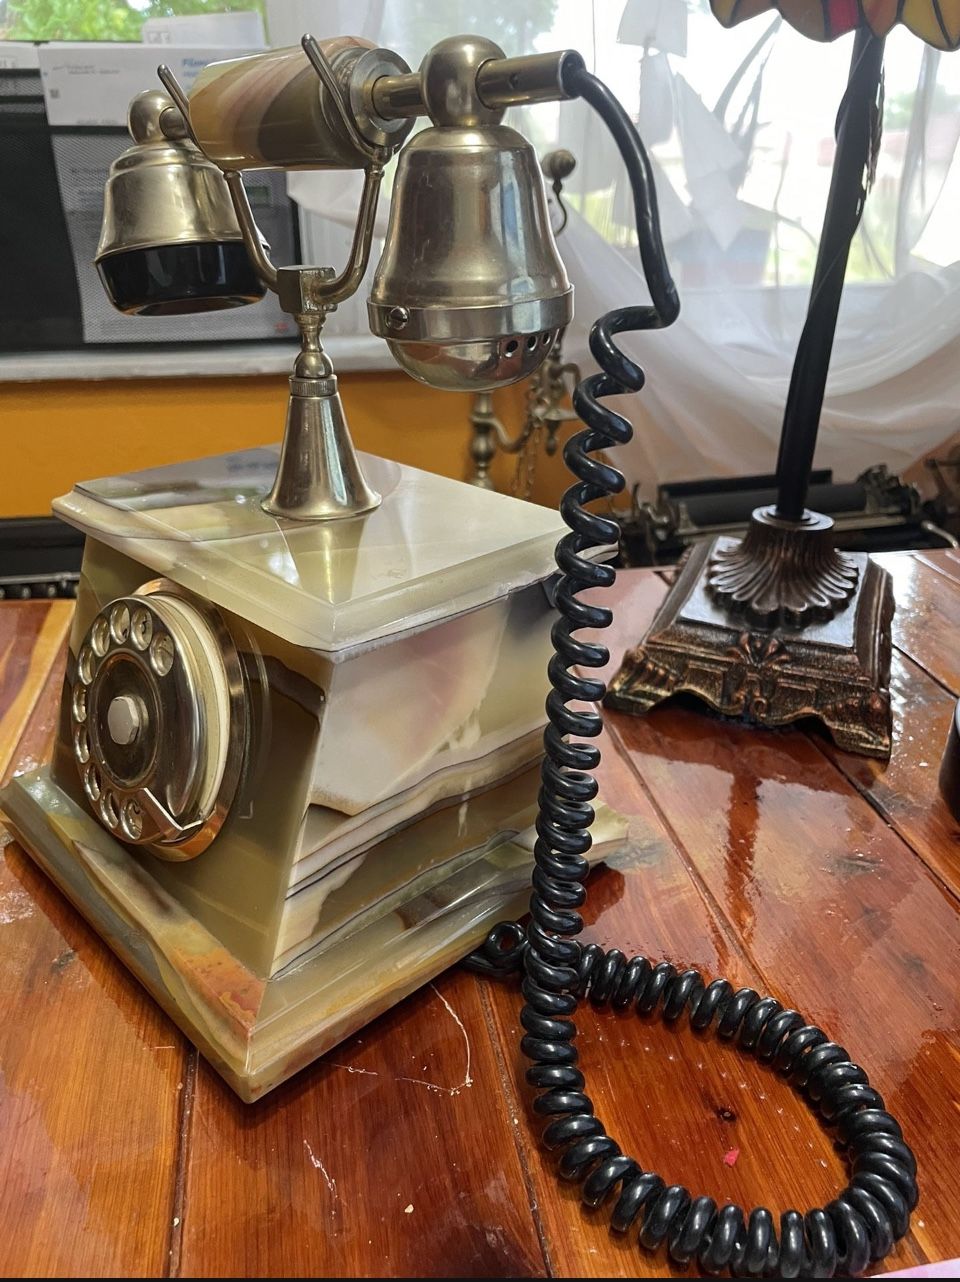 Vintage ONIX TELMAR 18K Gold Plated Onyx Rotary Antique Style Telephone  Italy. for Sale in Pembroke Pines, FL - OfferUp